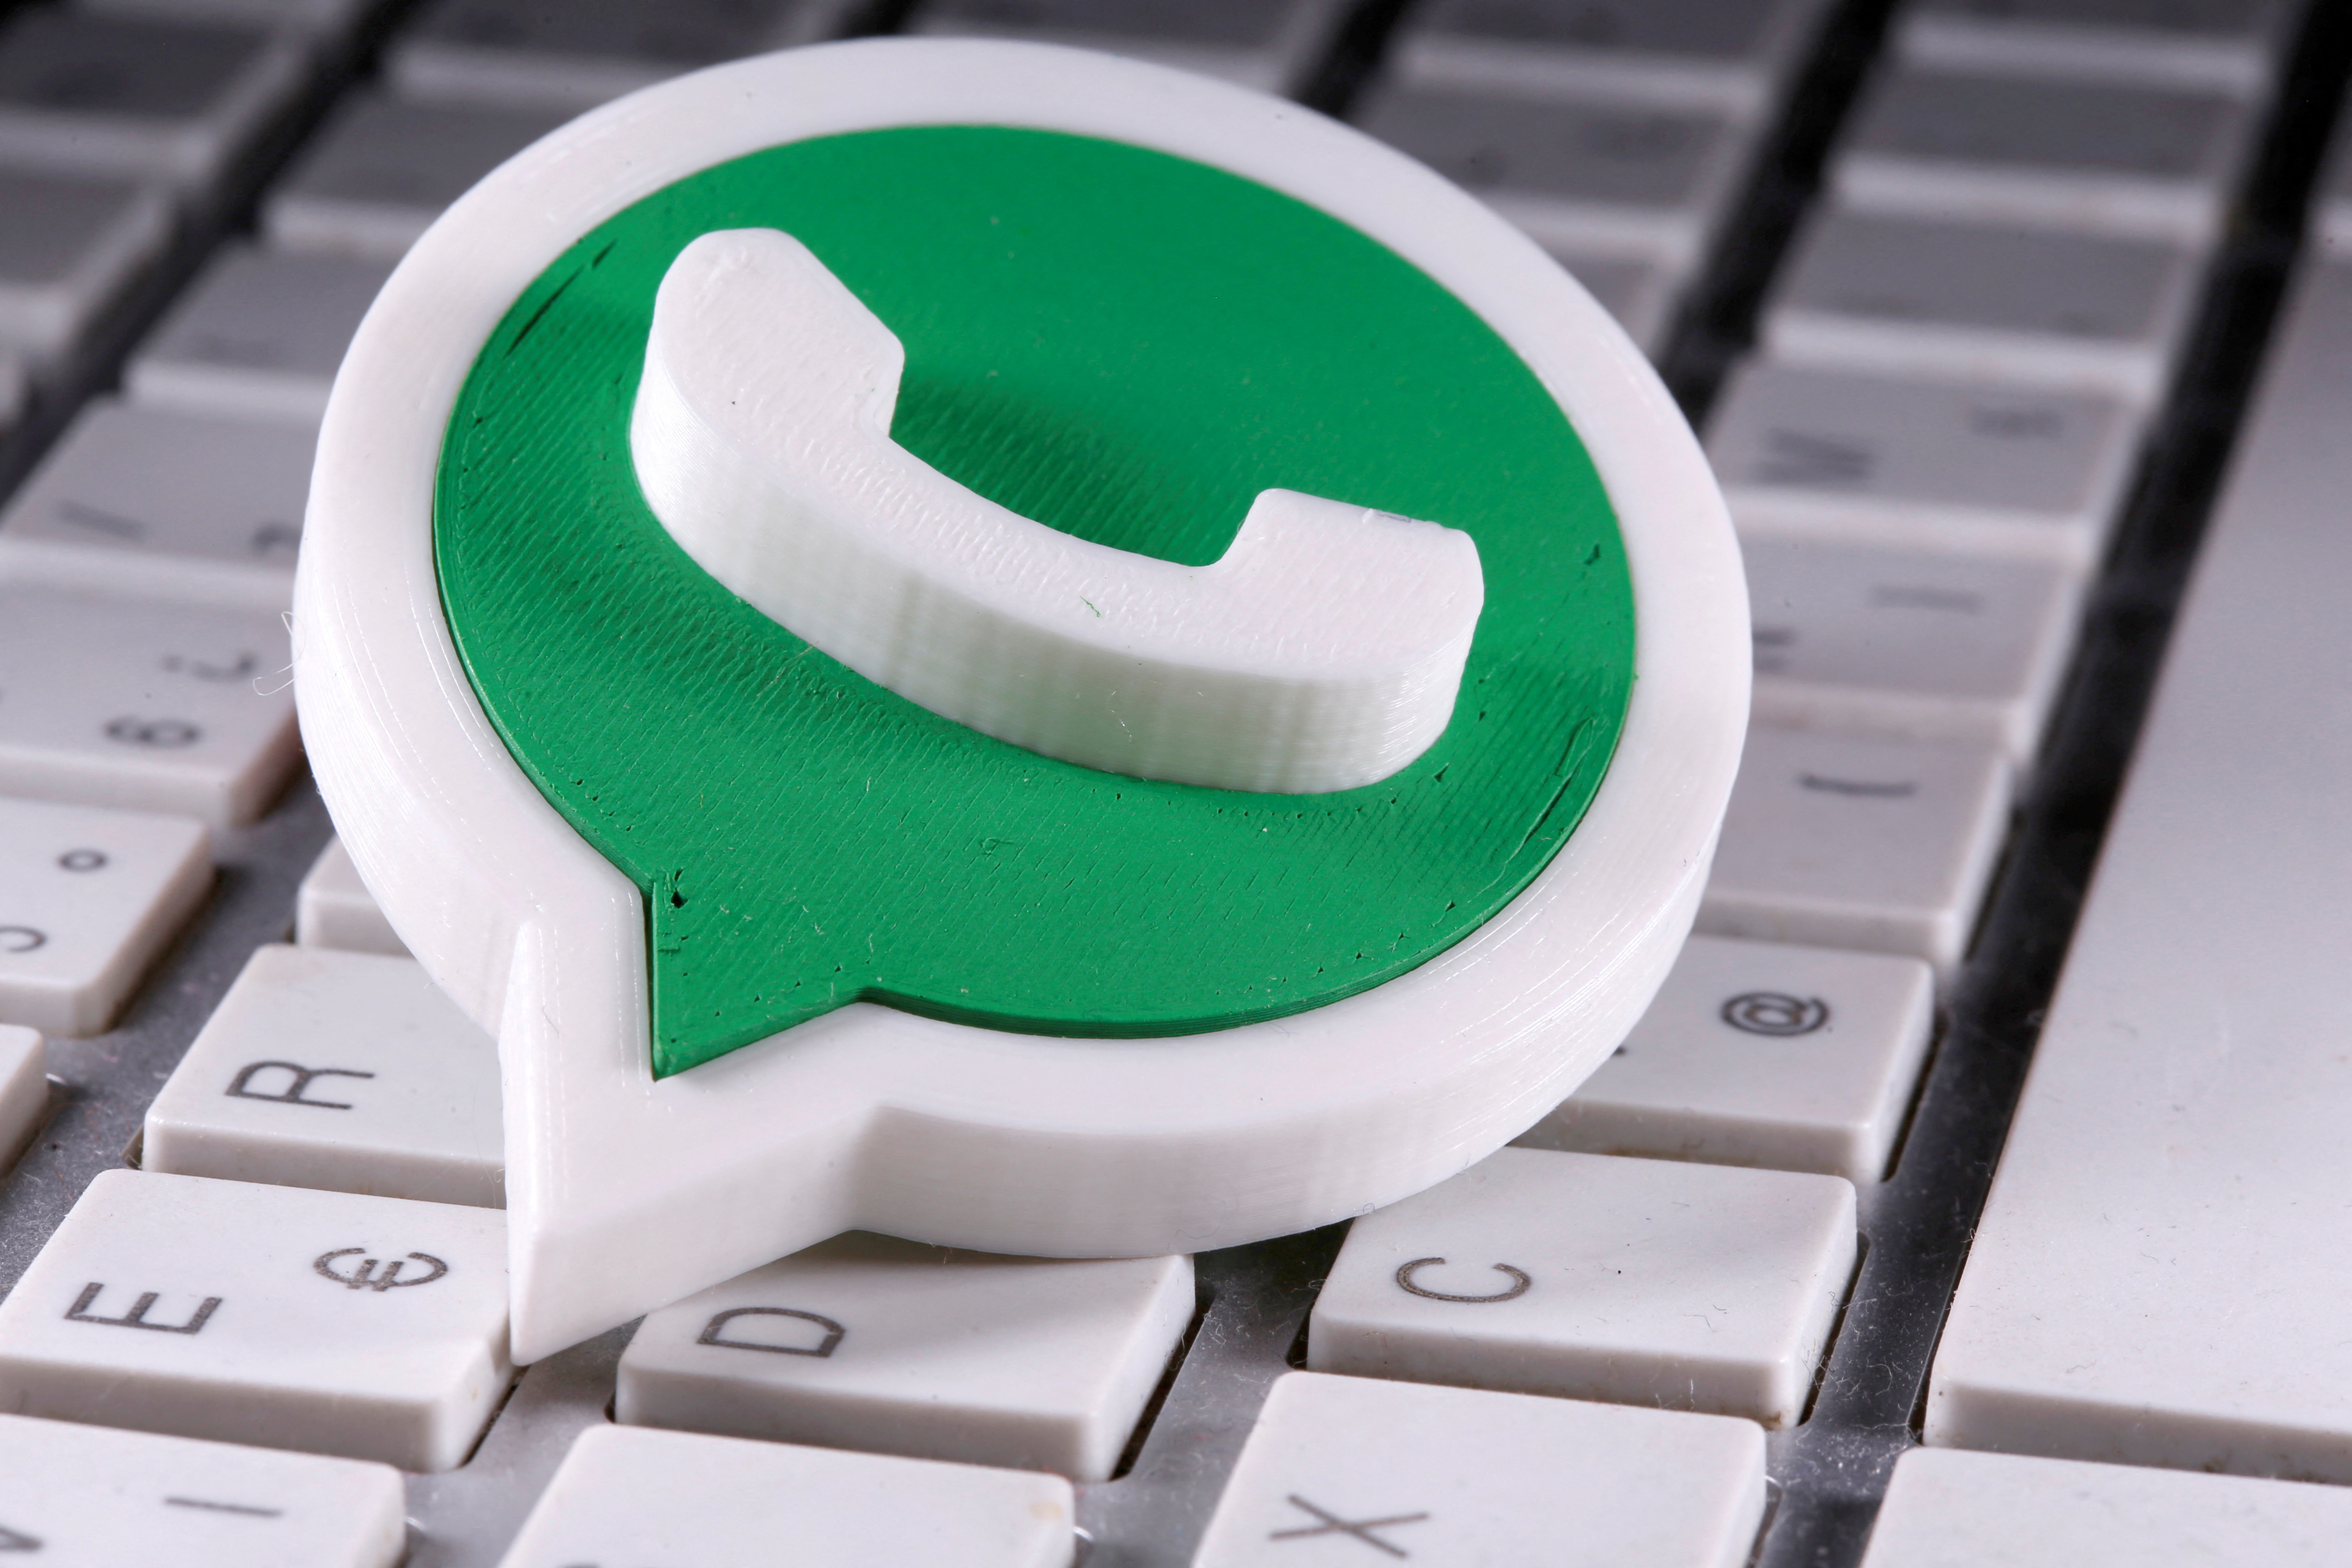 A 3D-printed Whatsapp logo is placed on the keyboard in this illustration taken